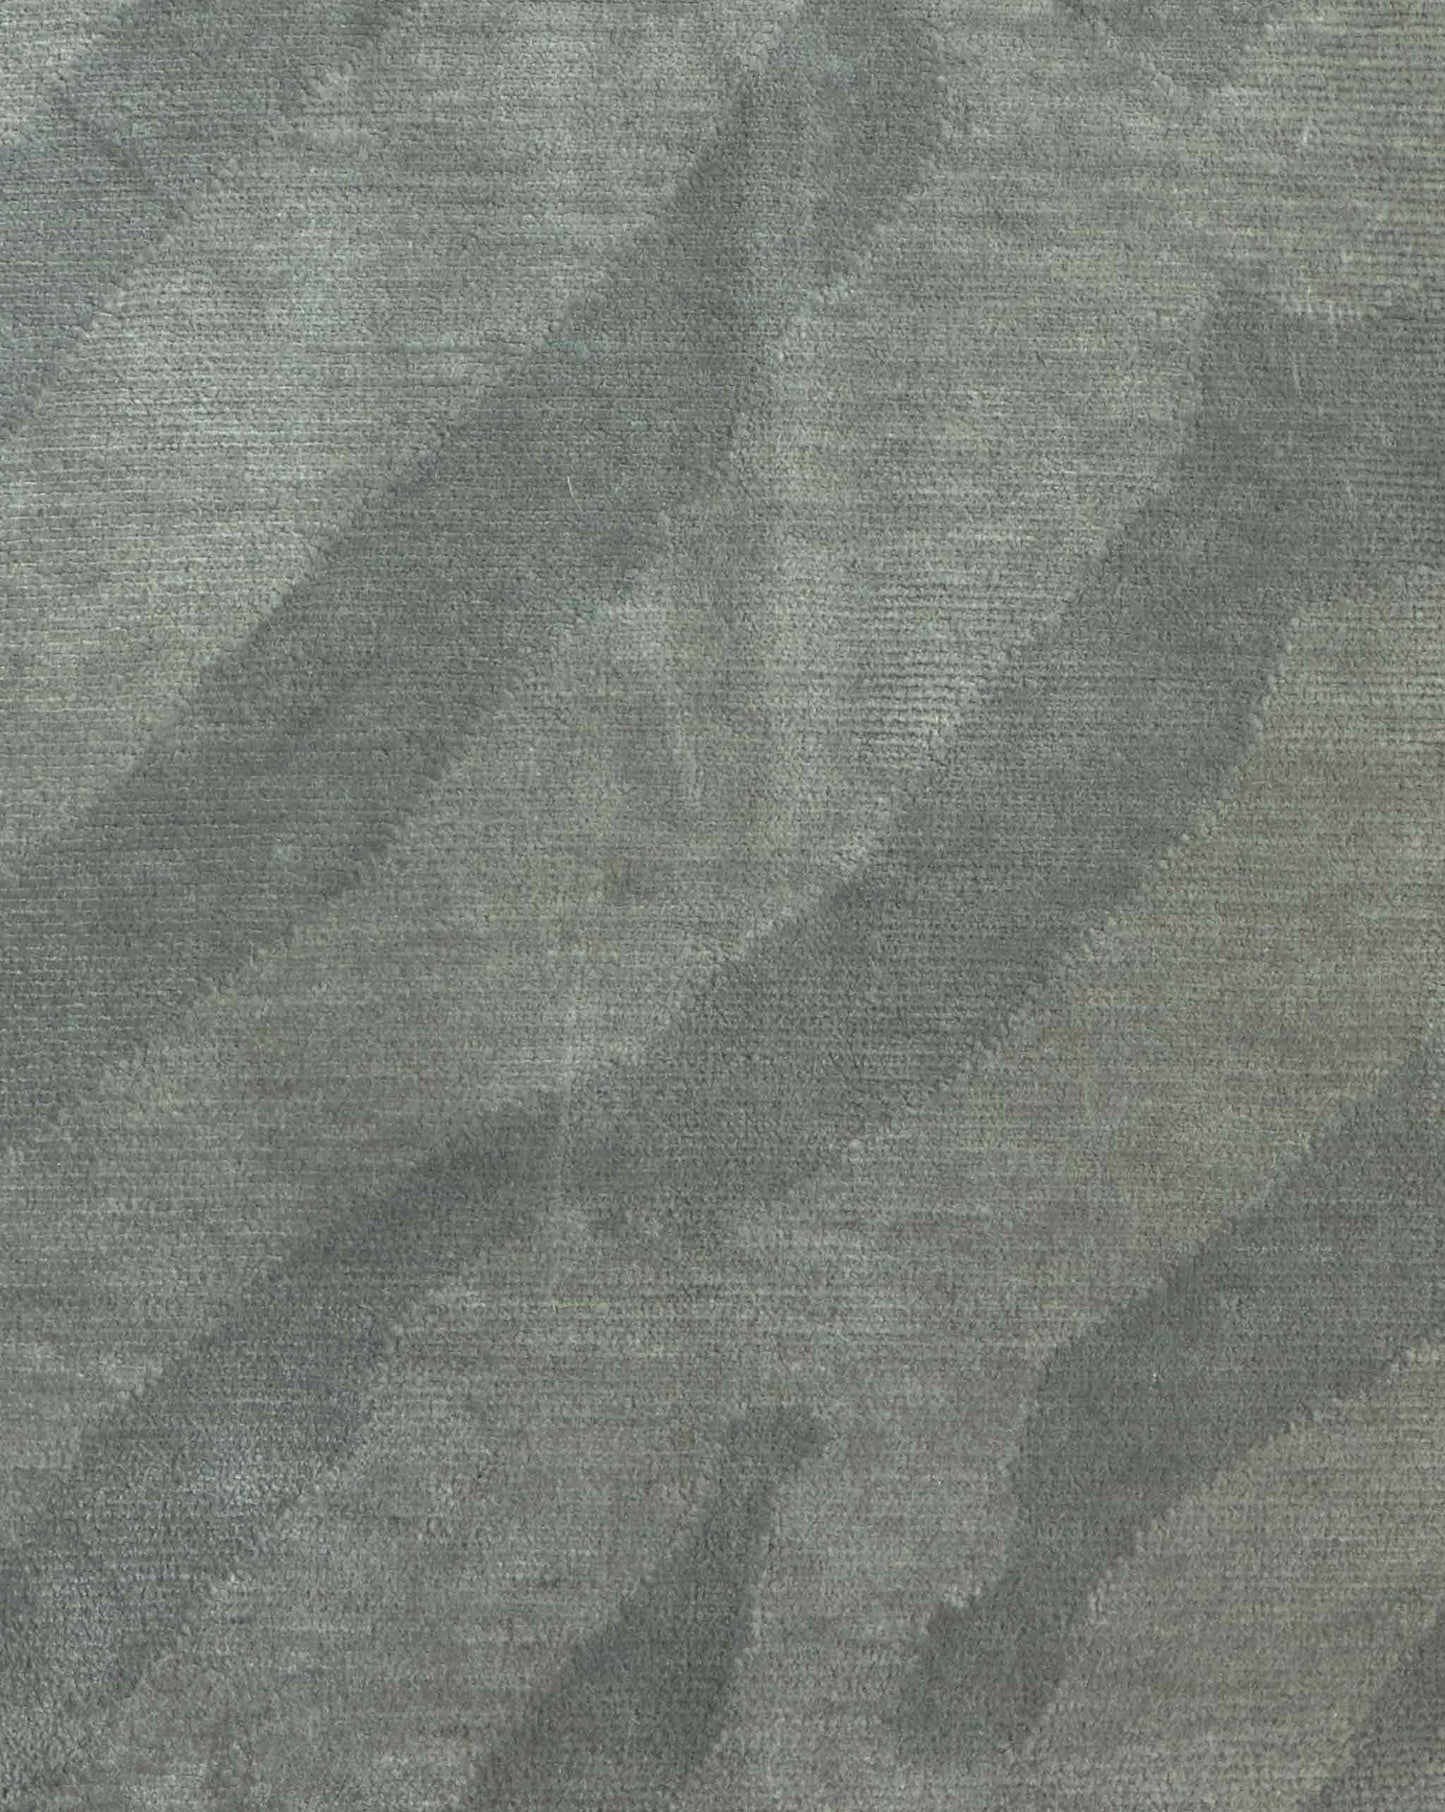 A close up image of the Sand Lines rug in Sage.